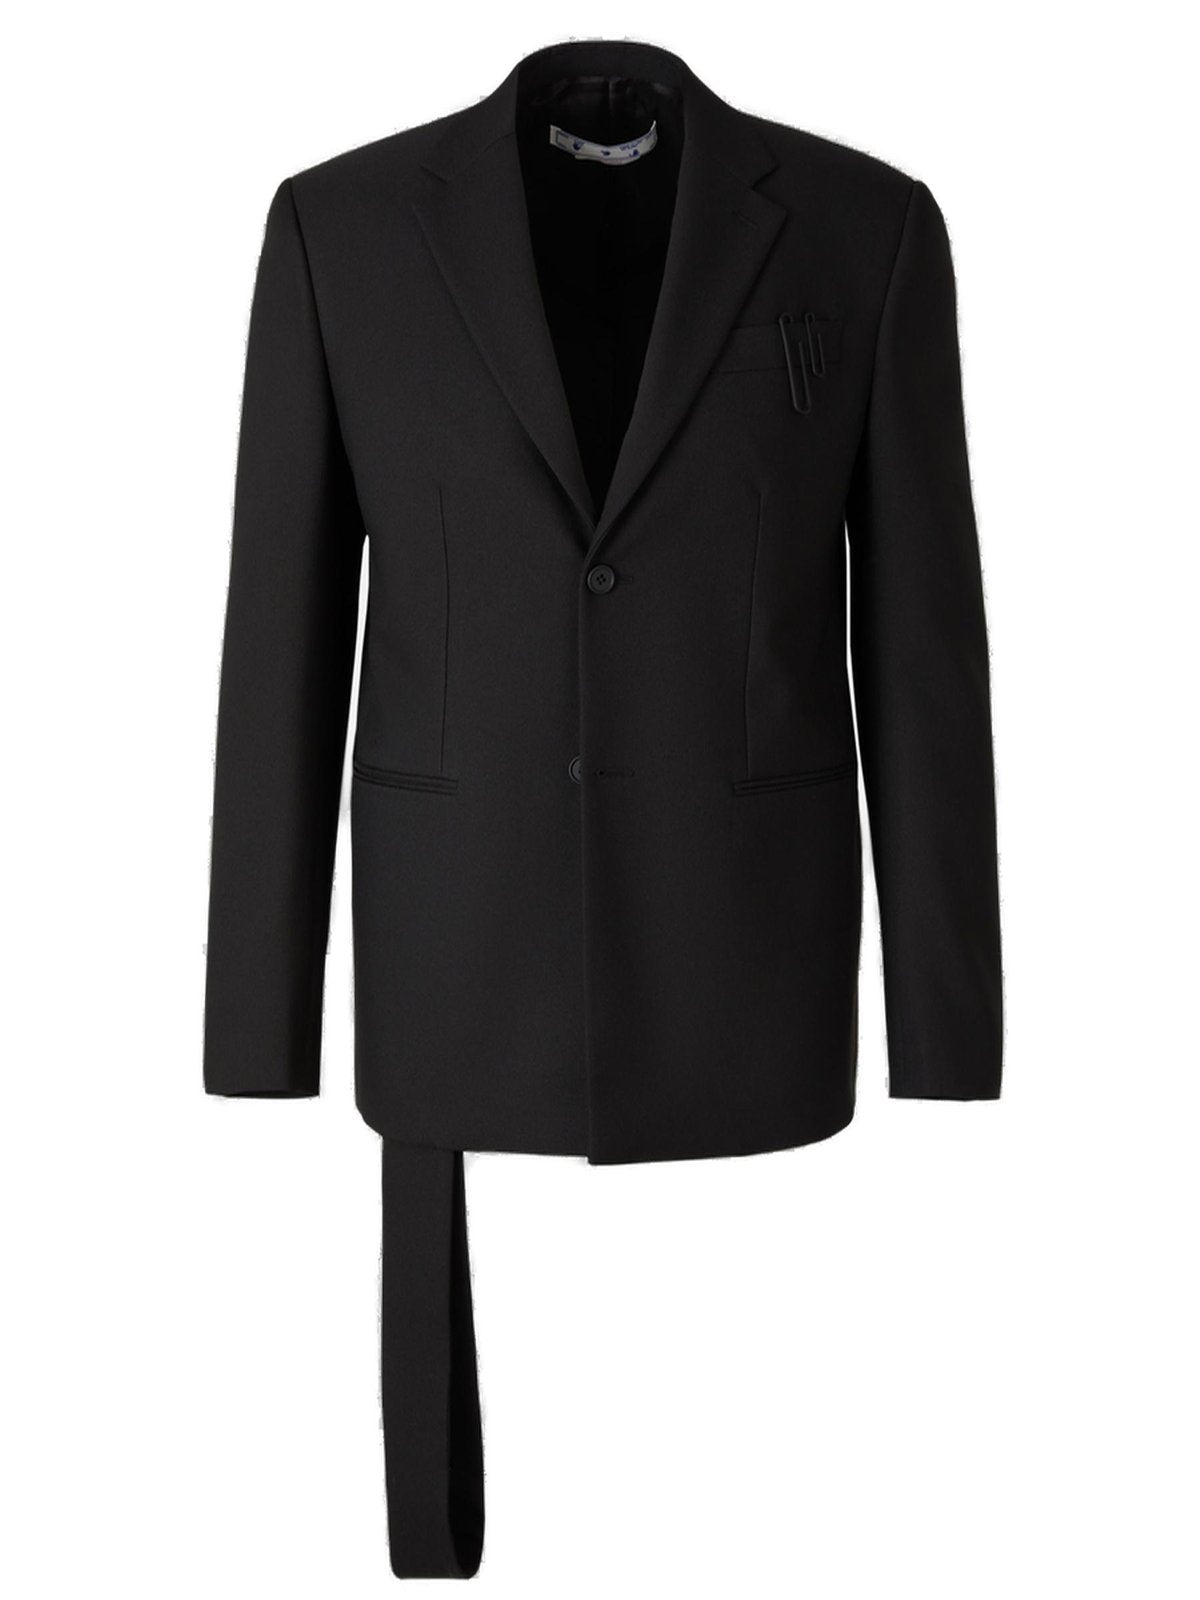 Off-White Single-Breasted Tailored Blazer